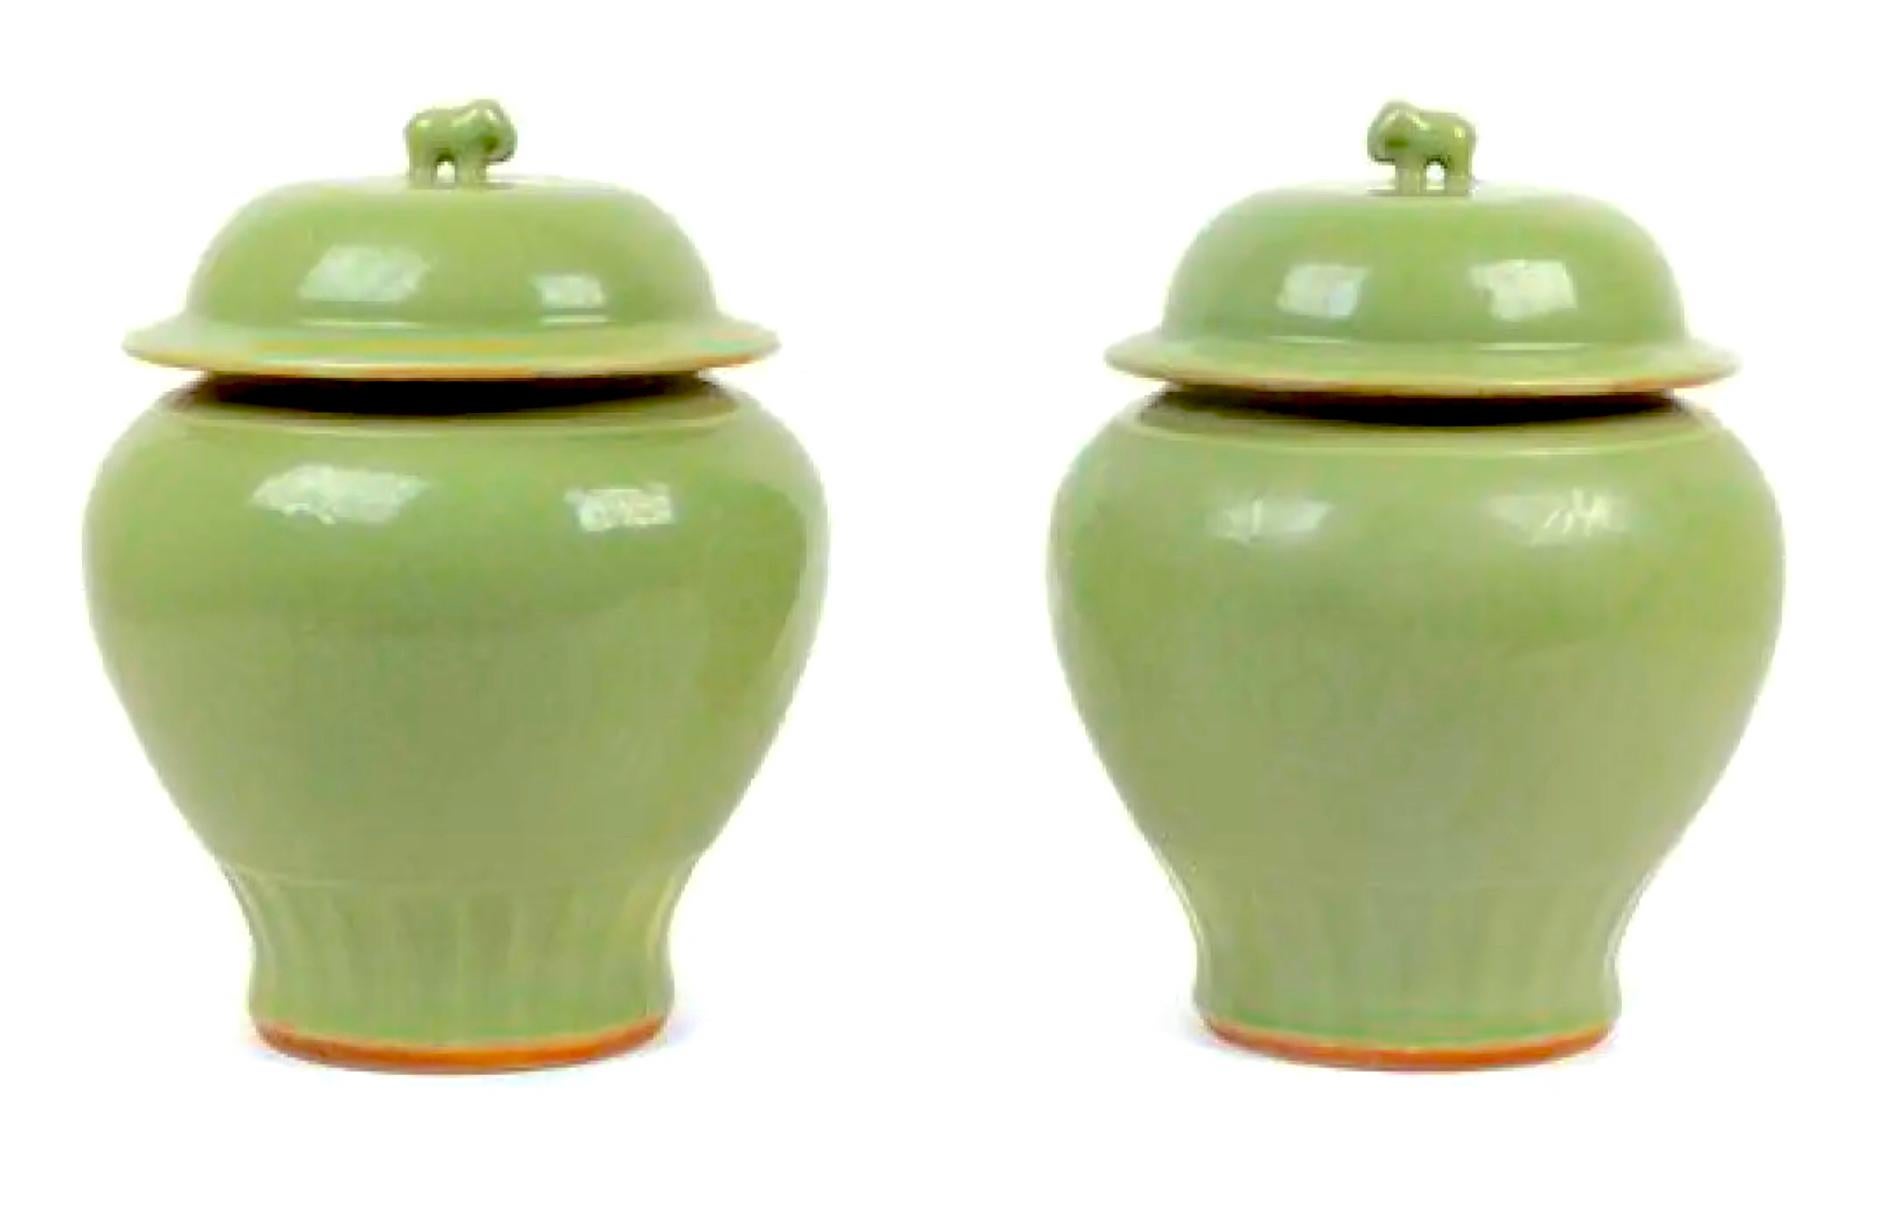 A standout pair of late 19th-century Chinese authentic celadon, heavy, artisan-made ginger jars with elephant finials, both lids intact, making for the perfect duet.